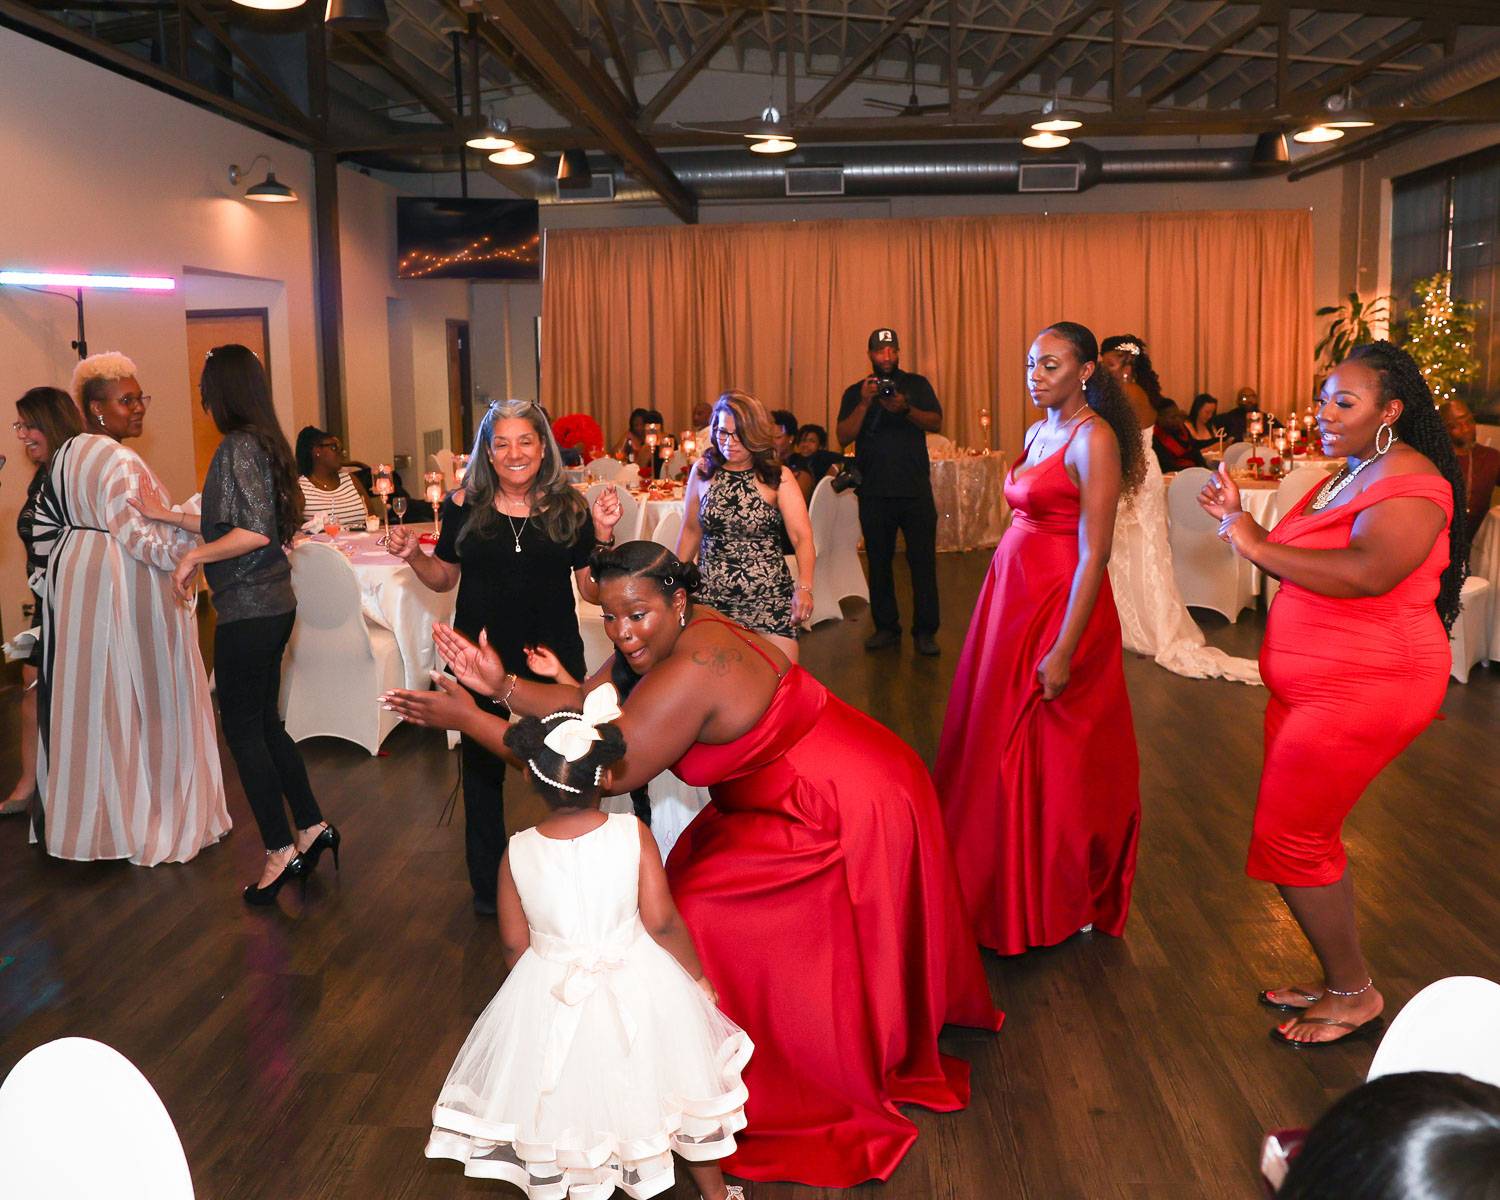 The bridesmaids dancing with the young girls